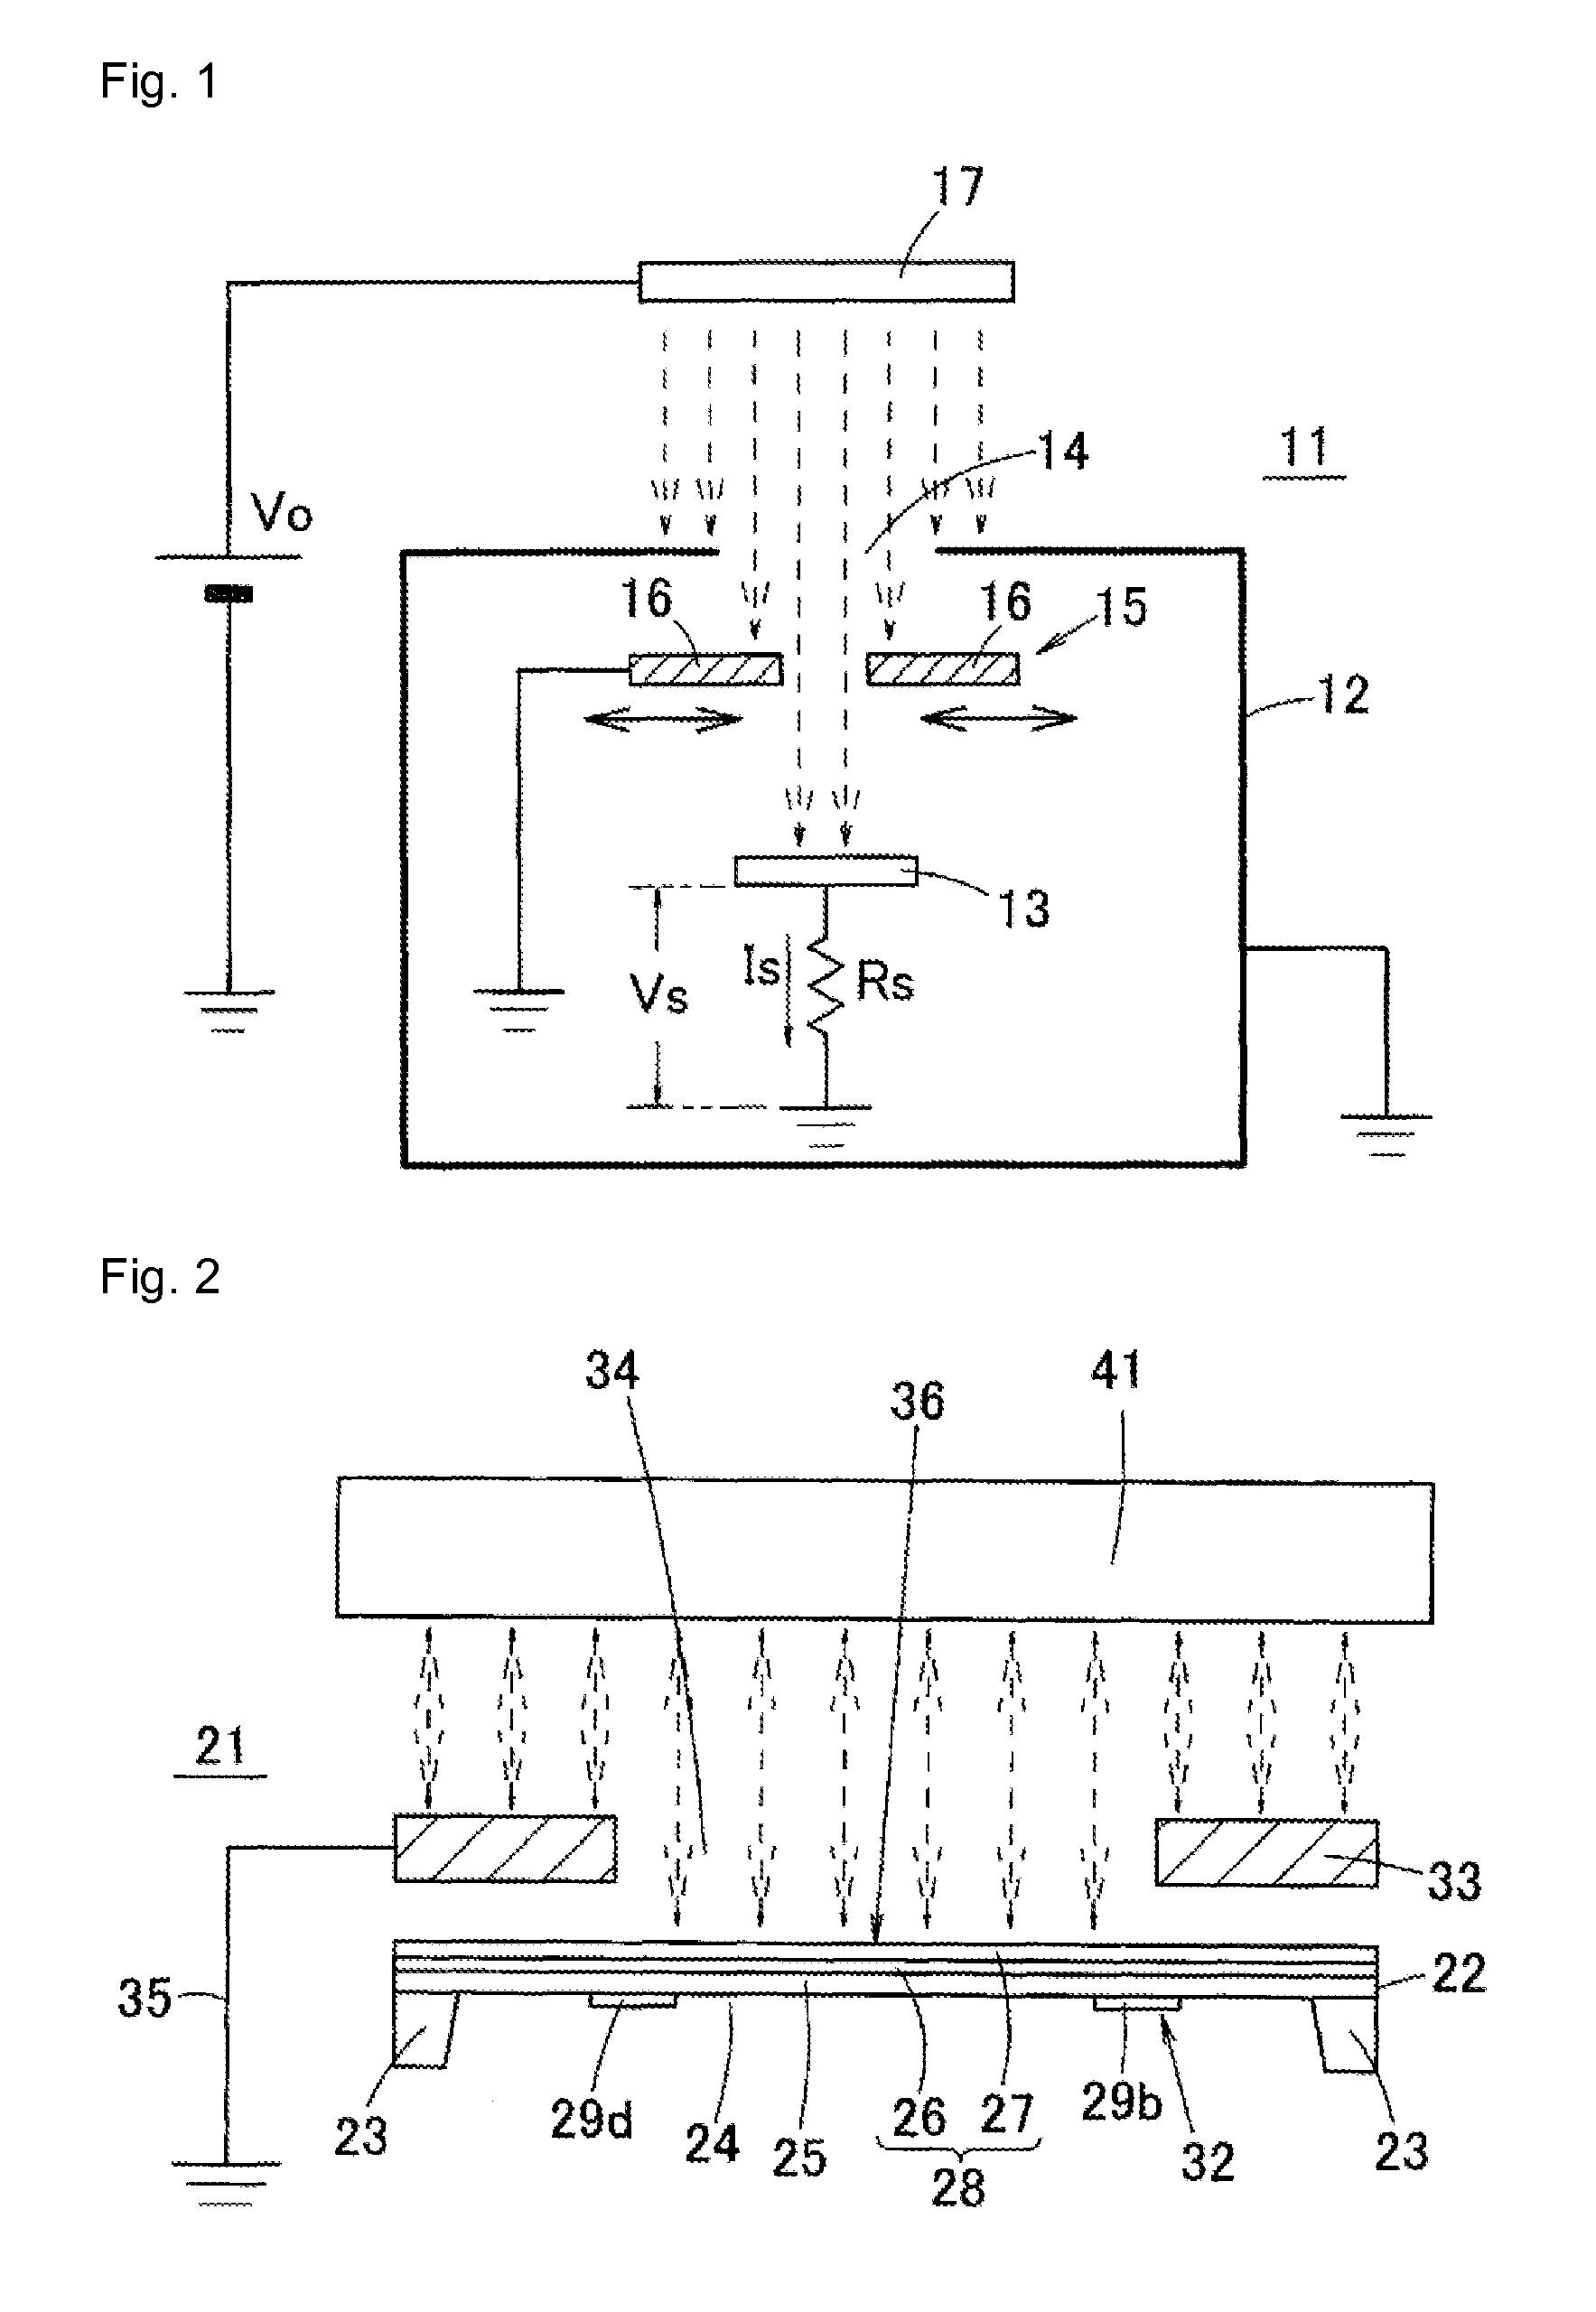 Surface potential sensor and copying machine